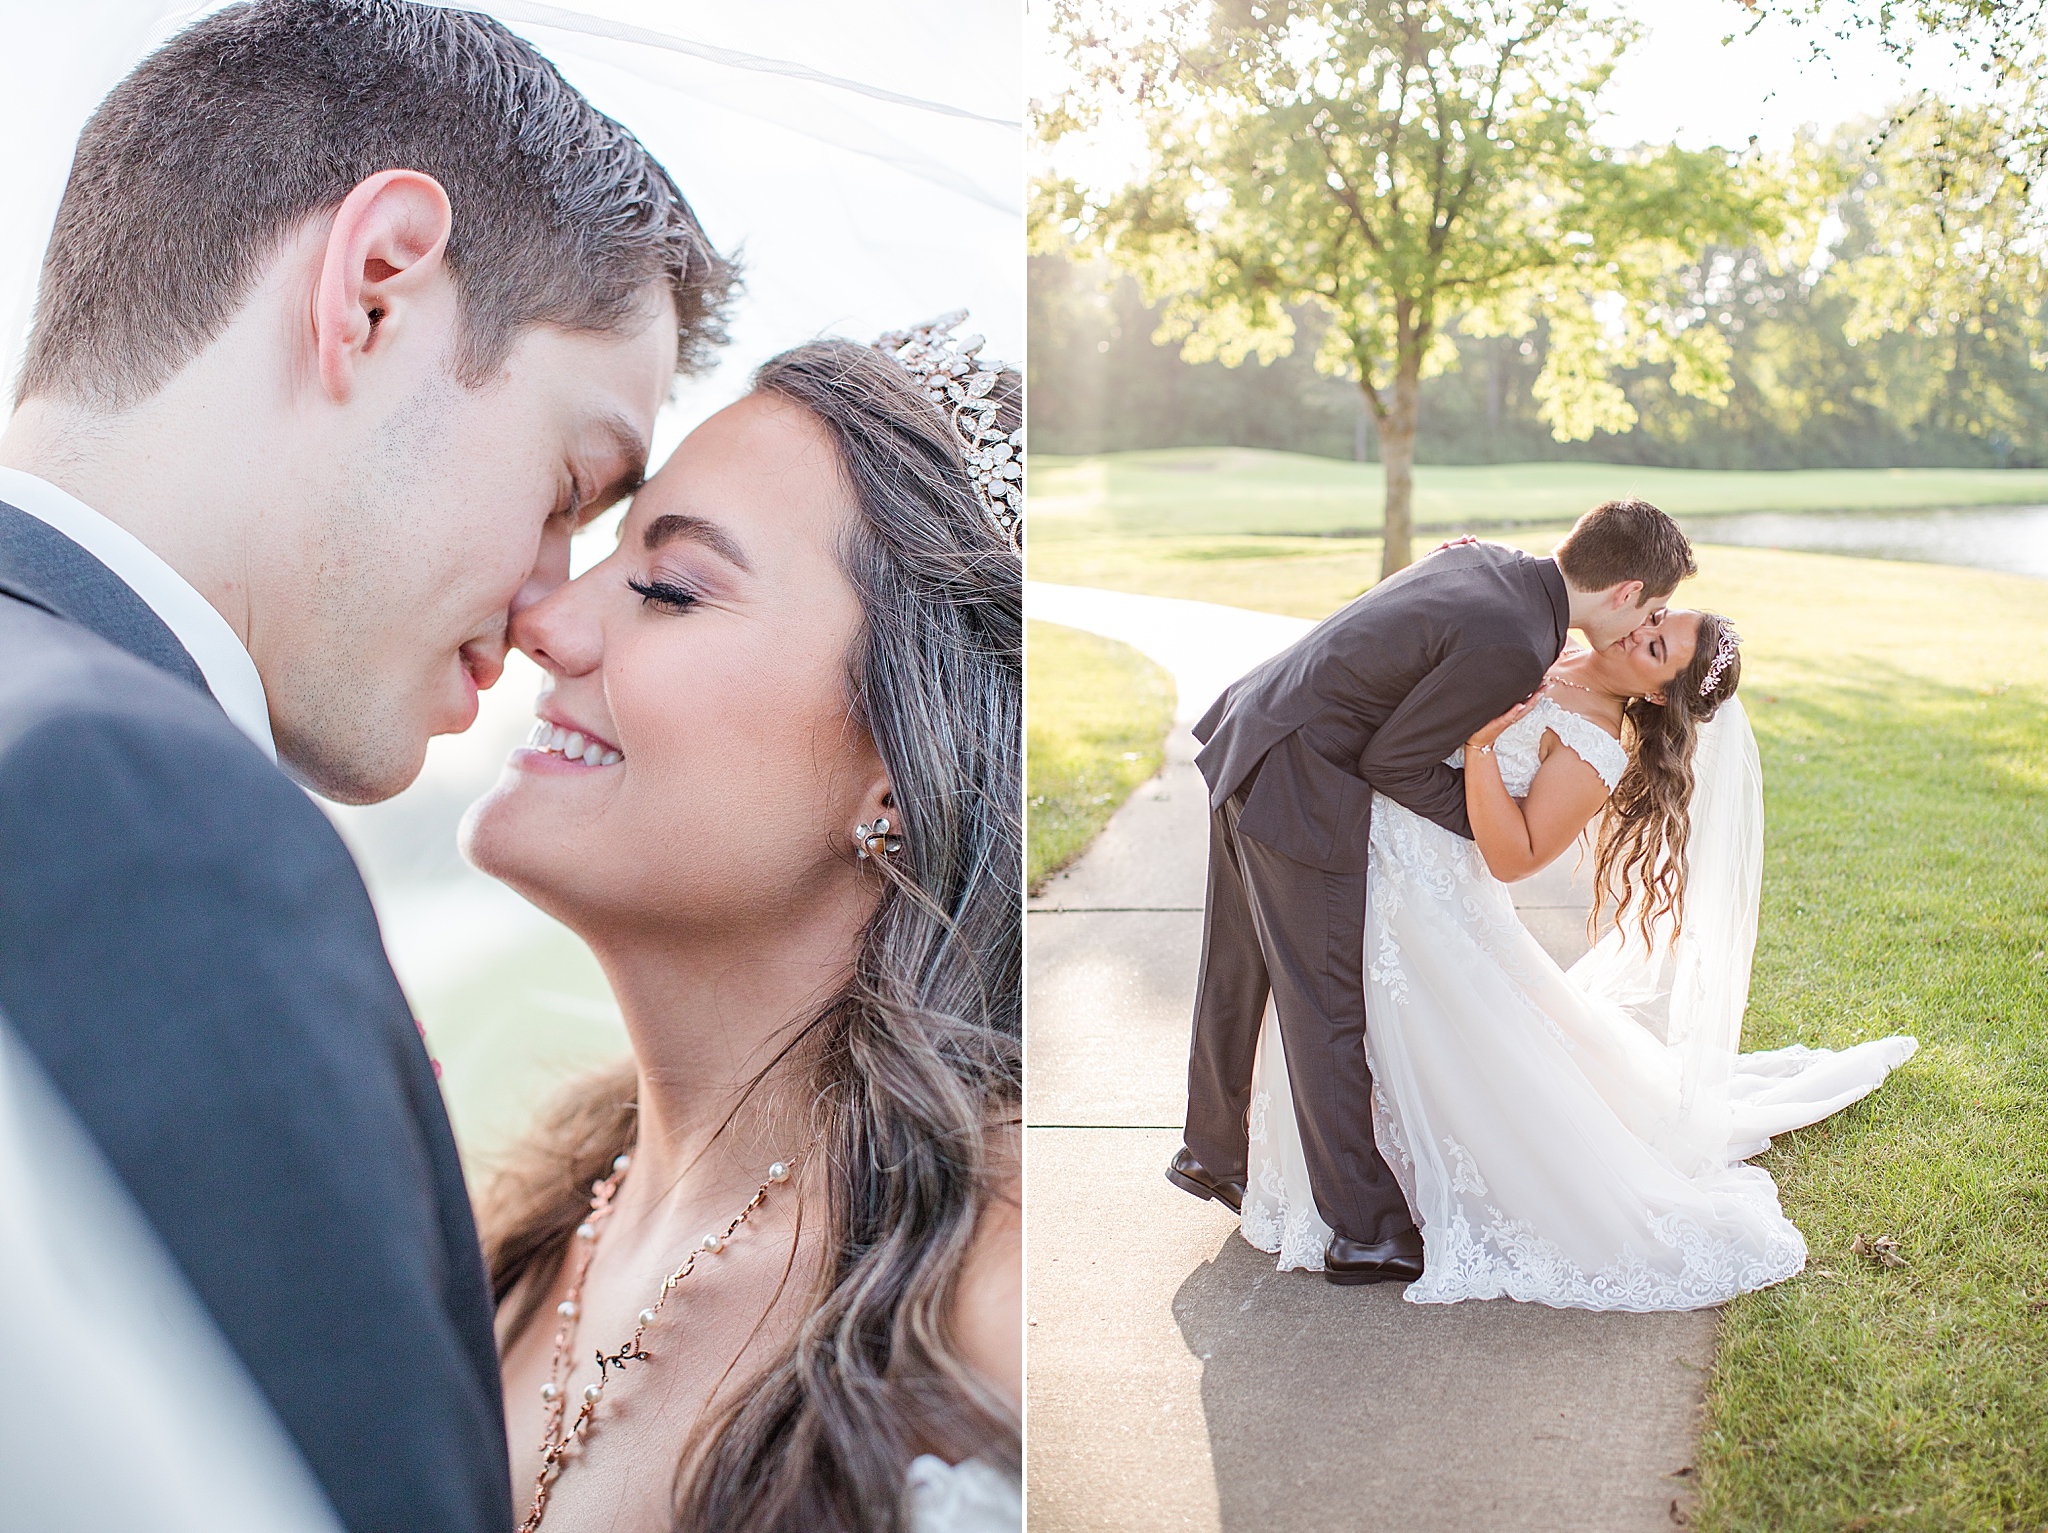 Old Hickory Golf Club wedding portraits at sunset for bride and groom